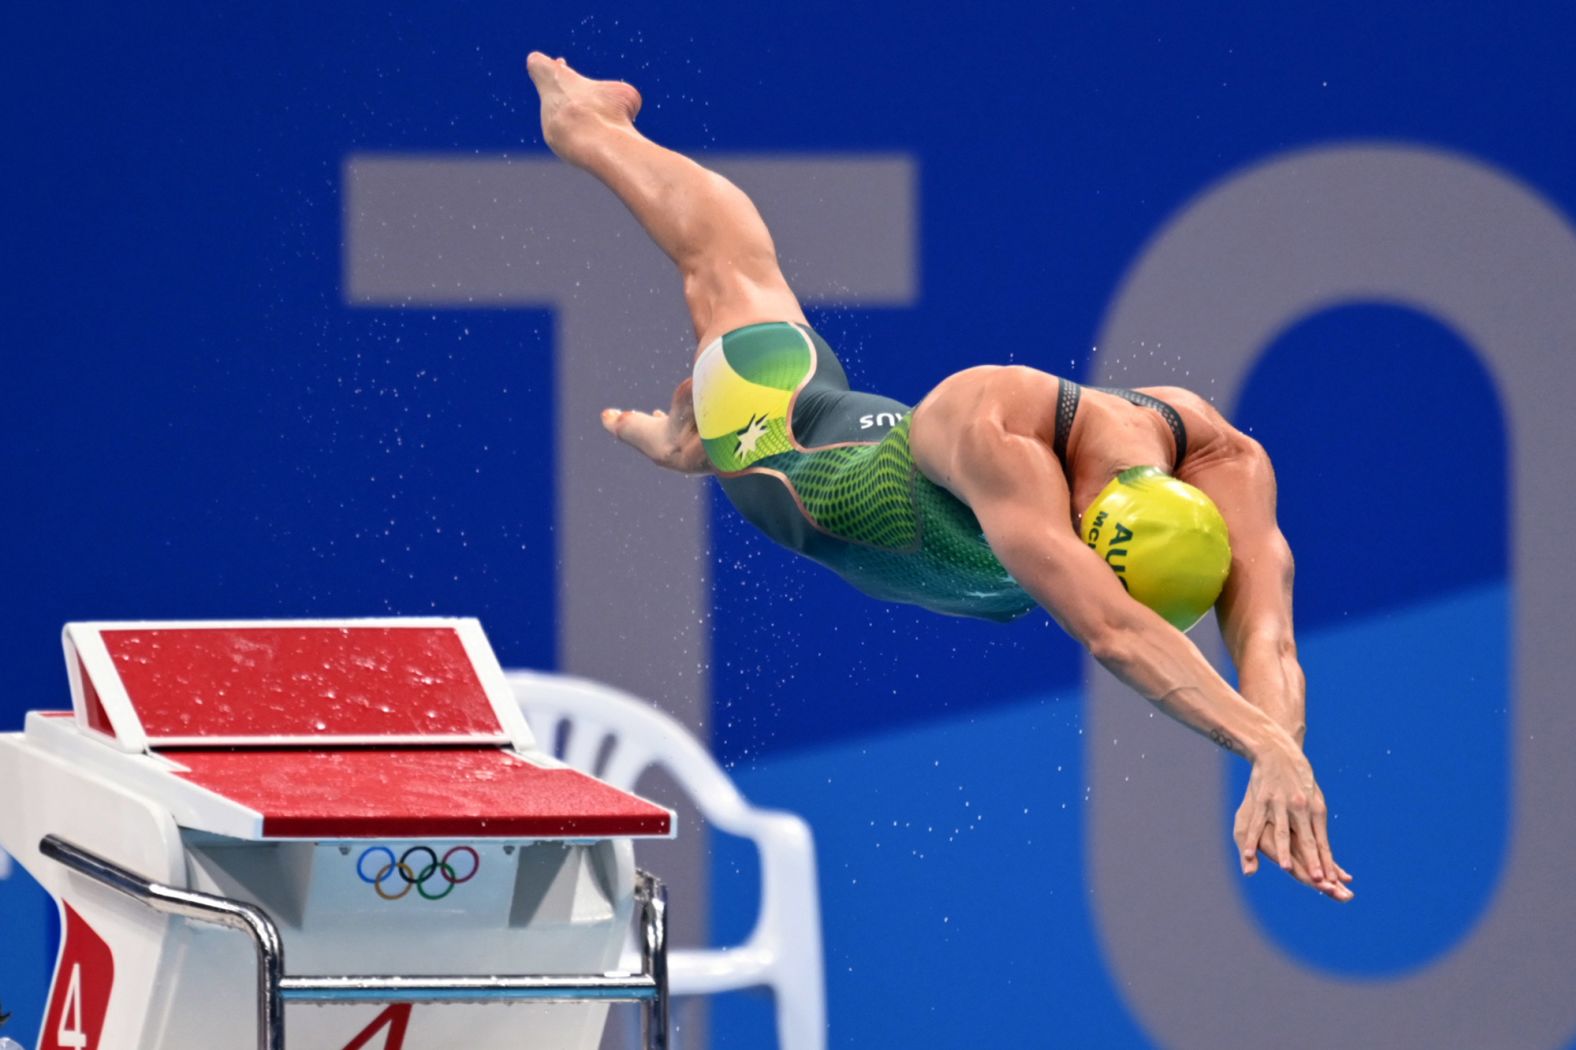 Australian swimmer Emma McKeon dives into the pool at the start of the 50-meter freestyle final on August 1. <a href="index.php?page=&url=https%3A%2F%2Fwww.cnn.com%2Fworld%2Flive-news%2Ftokyo-2020-olympics-07-31-21-spt%2Fh_a446974be9f9f42dd484d438fdc1f426" target="_blank">She won her third gold in Tokyo</a> and set an Olympic record time of 23.81 seconds.